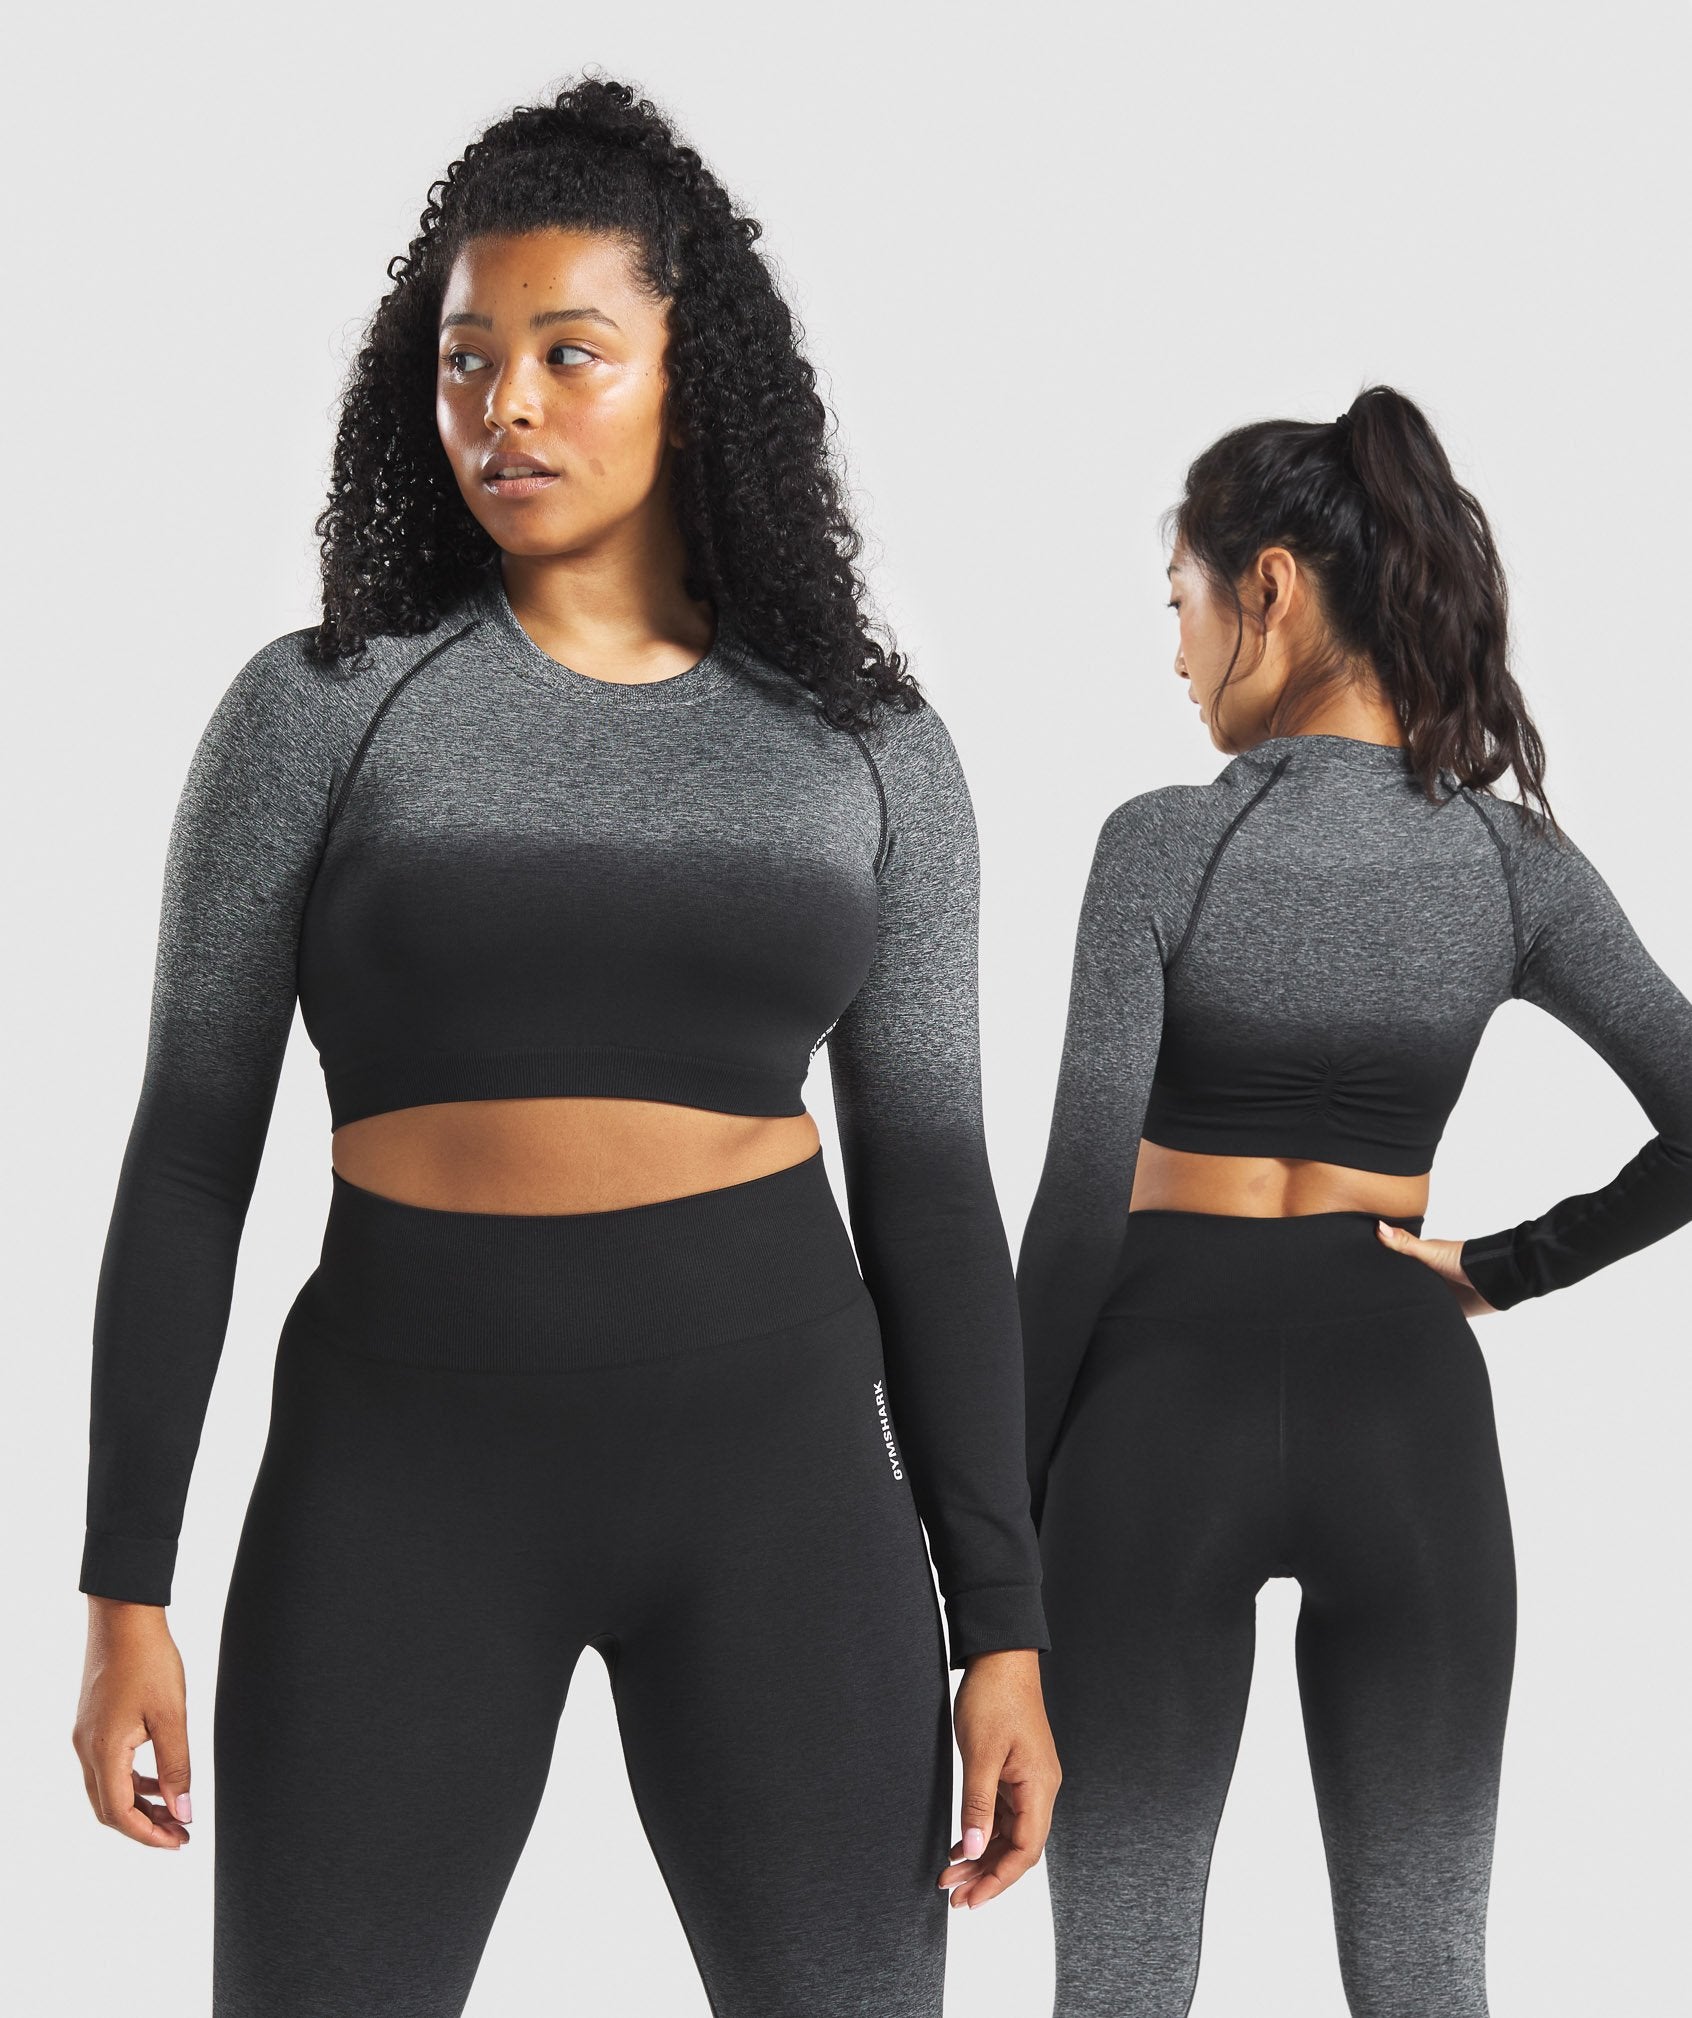 Gymshark Adapt Ombré Seamless Leggings Black Size XS - $45 (25% Off Retail)  - From Chelsea